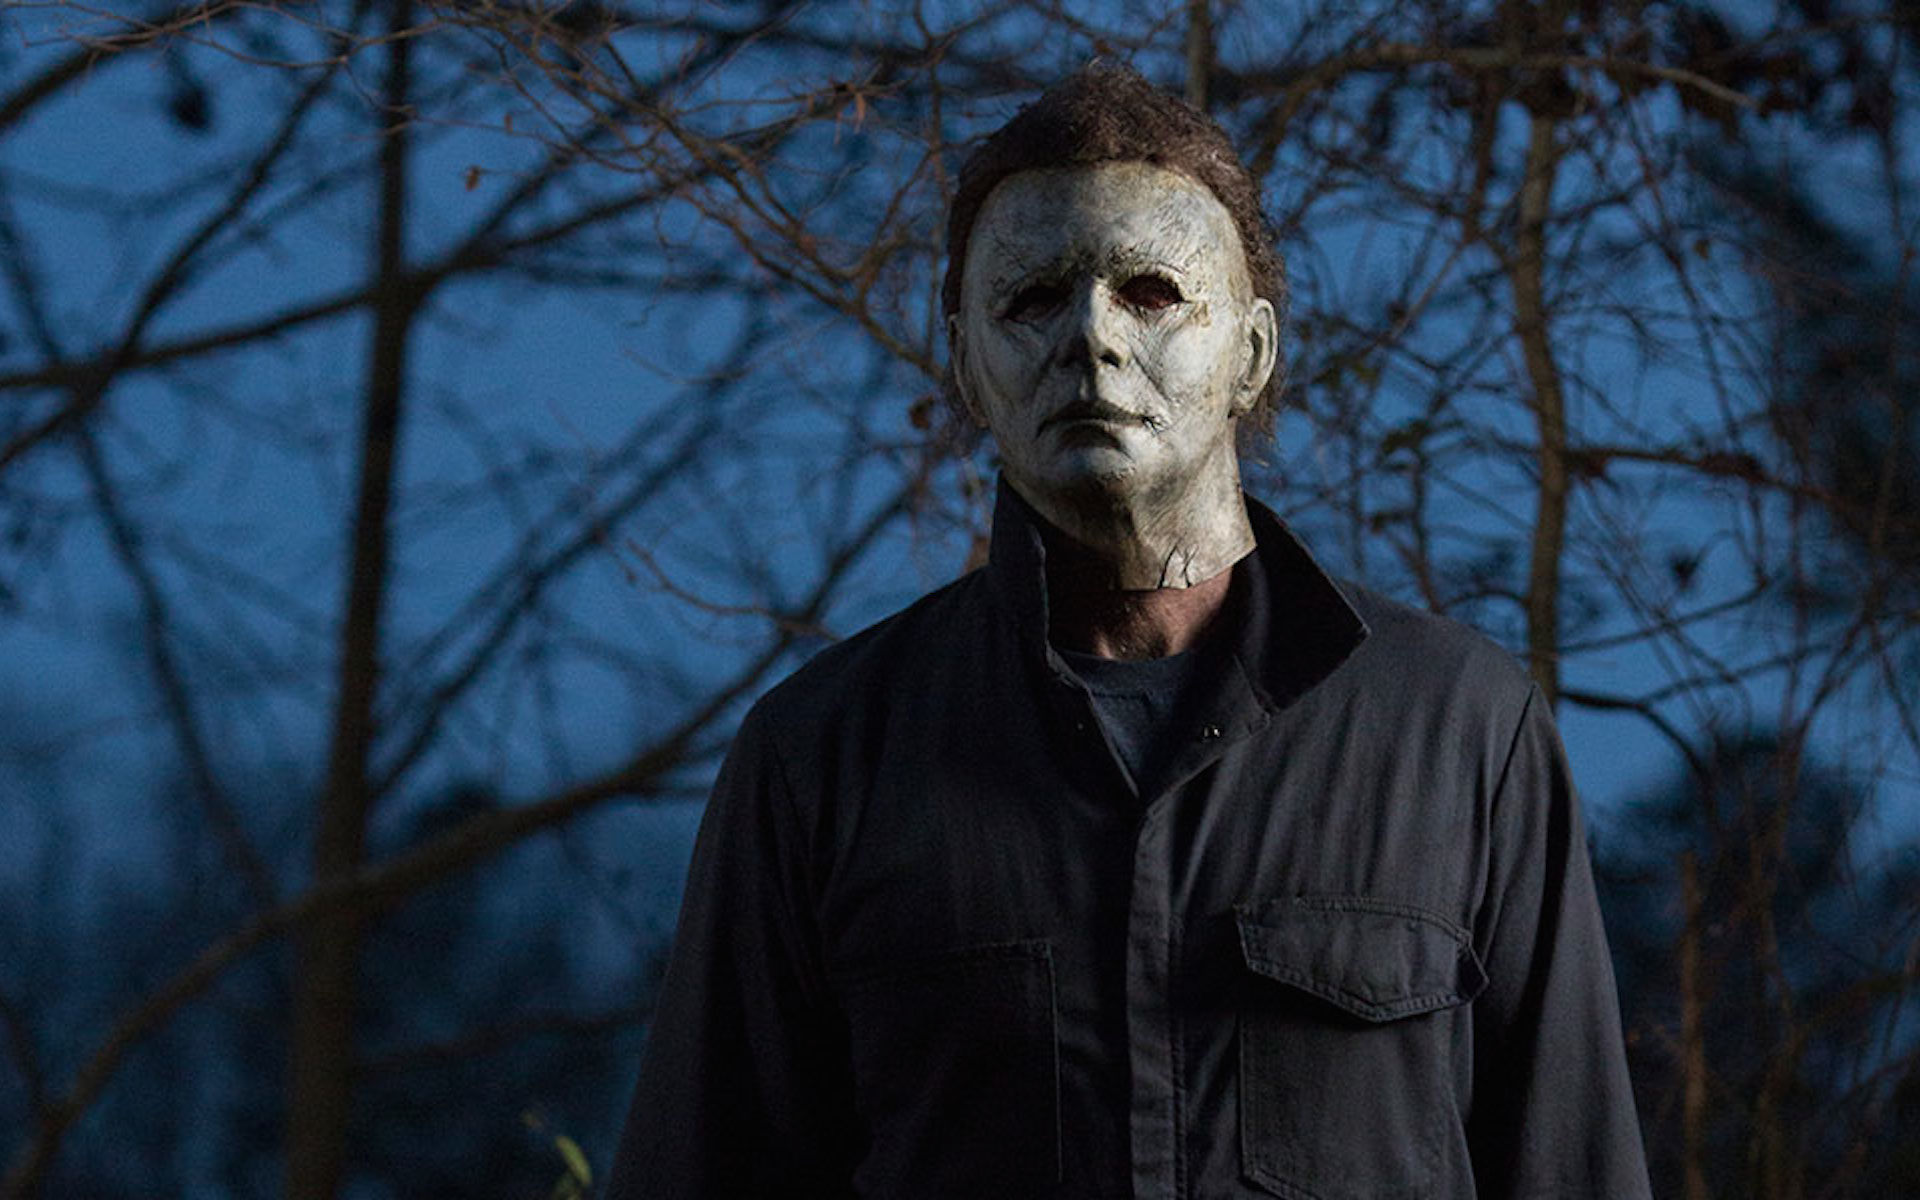 michael myers actor nationality